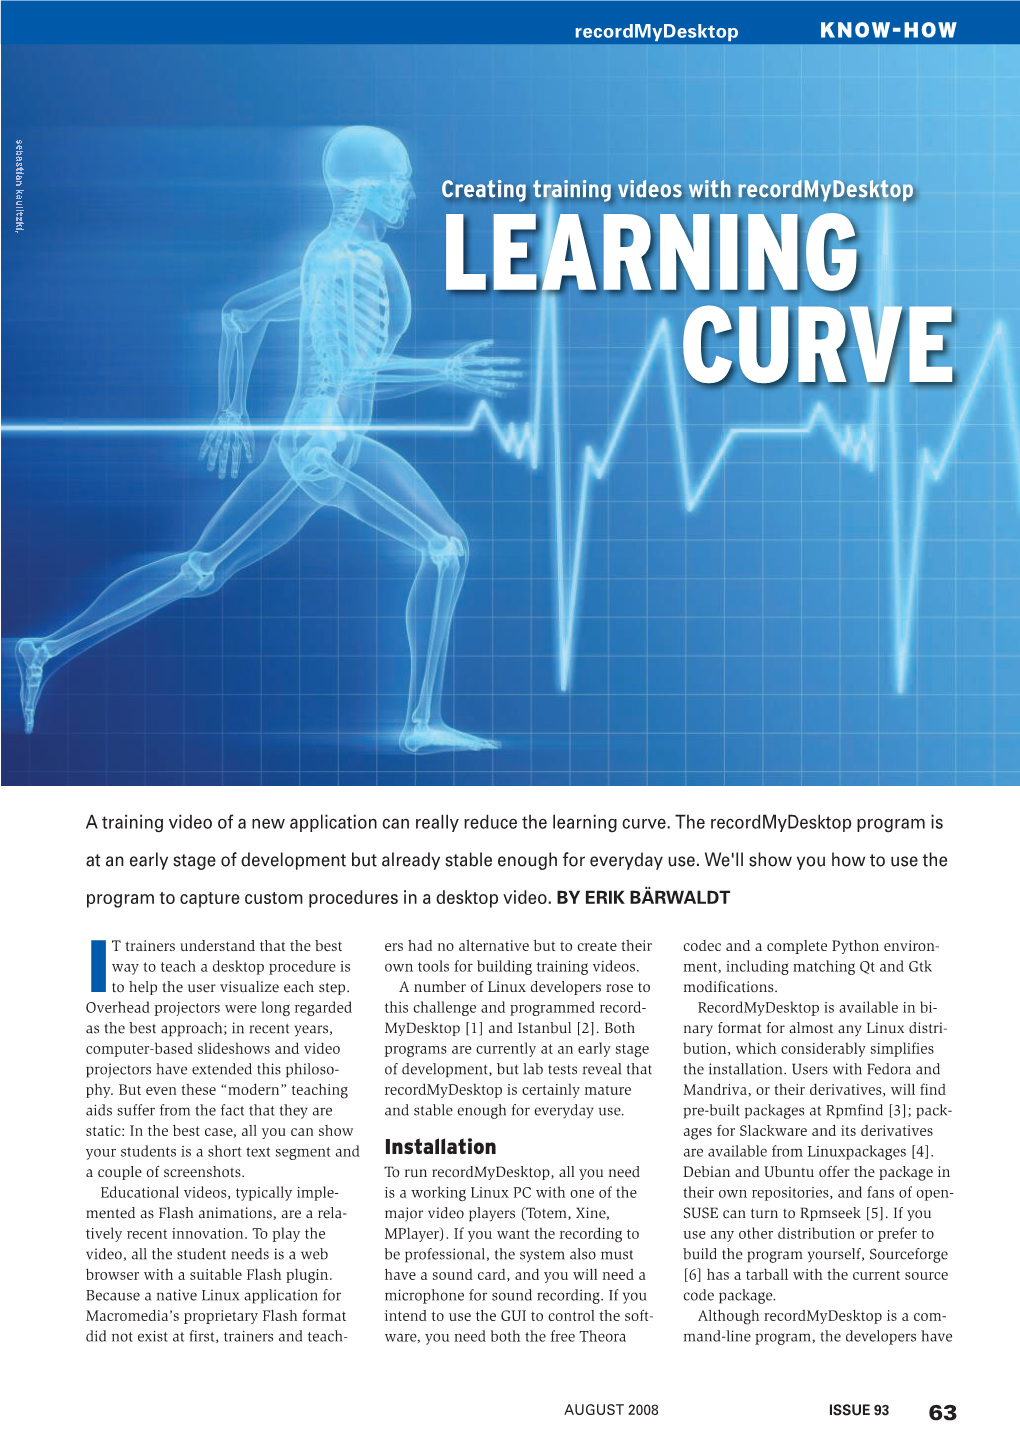 Learning Curve